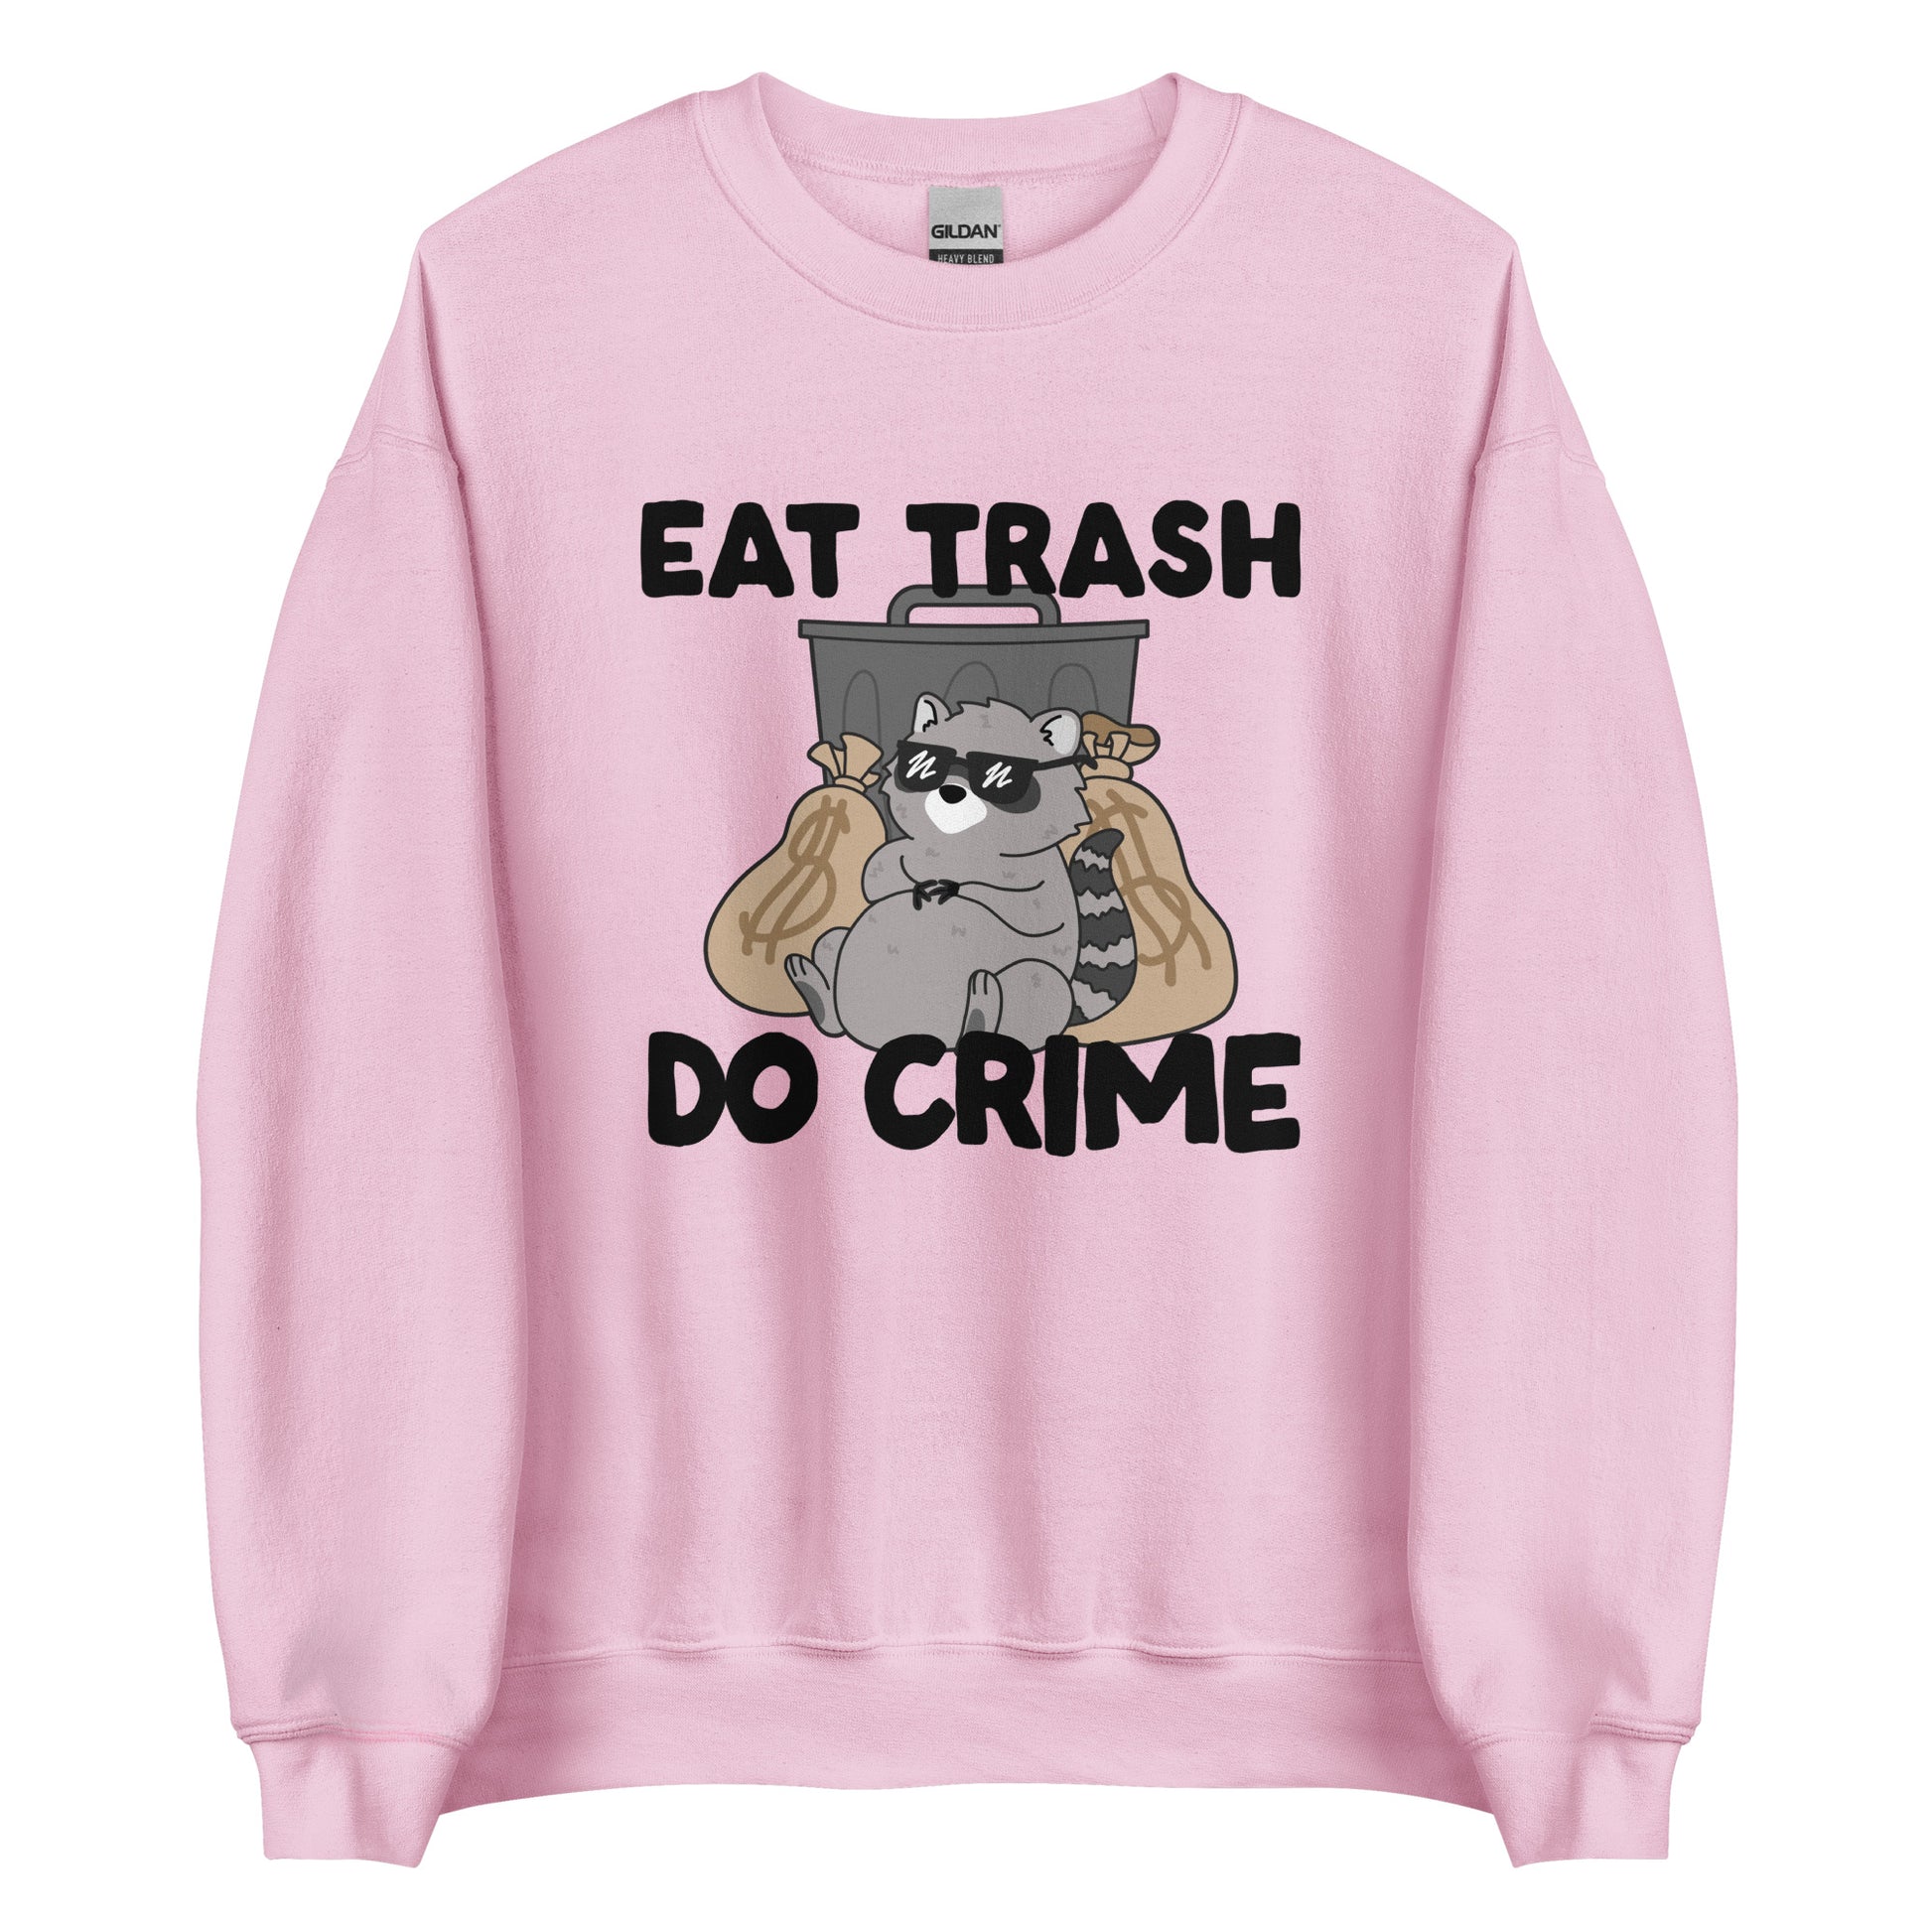 A light pink crewneck sweatshirt featuring an illustration of a chubby raccoon wearing sunglasses. The raccoon is leaning back against a trashcan and two large bags of money. Text surrouding the image reads "Eat Trash. Do Crime."